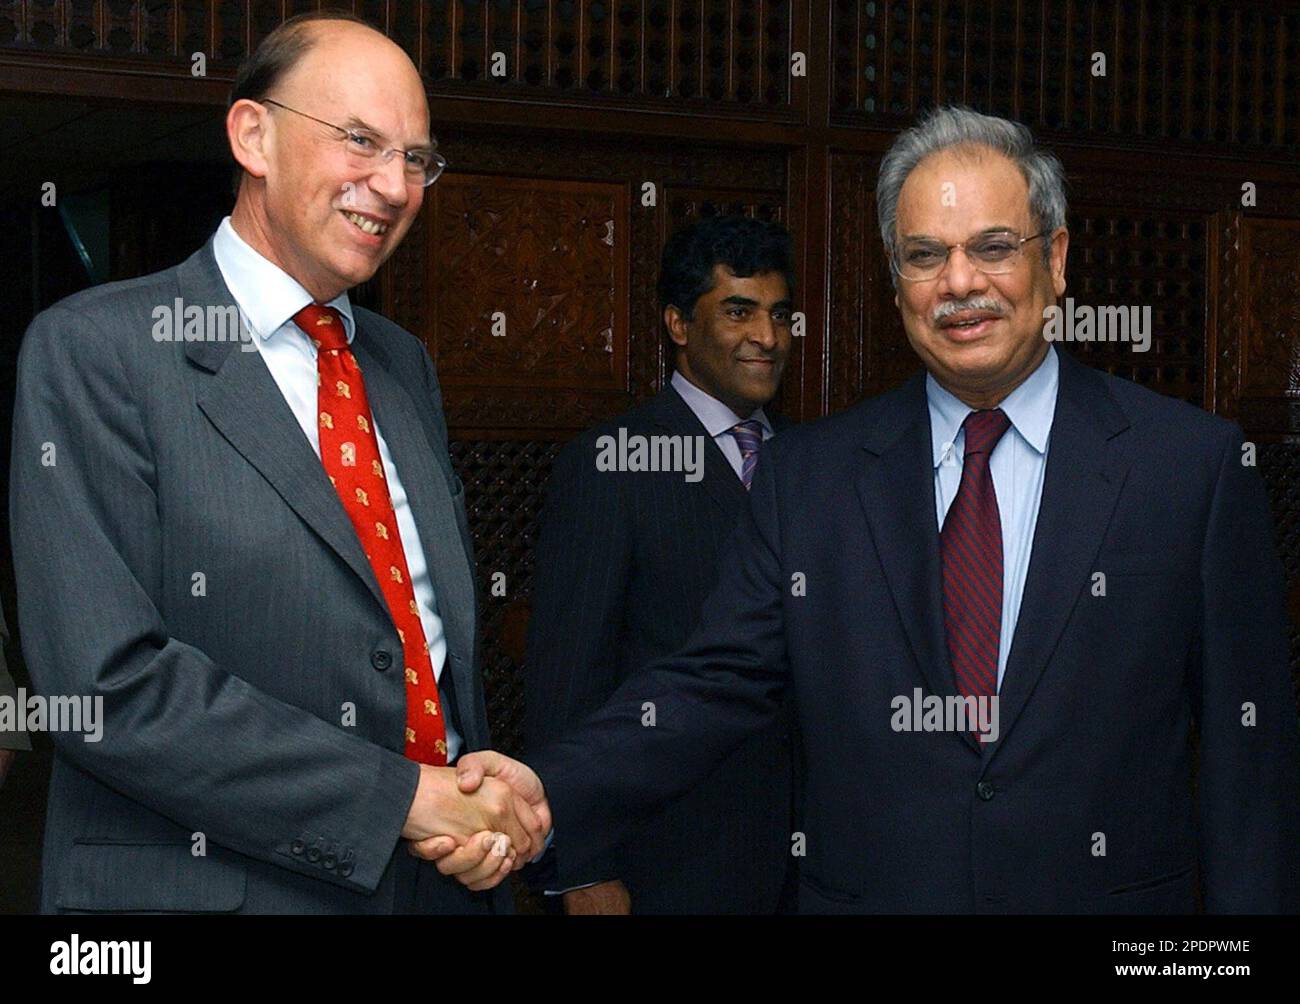 British Permanent Under Secretary Sir Michael Jay, left, shakes hand with Pakistan Foreign Secretary Riaz Mohammad Khan, prior to their talks in Islamabad, Pakistan on Monday, Sept. 26, 2005. They discussed issues of mutual interest. (AP Photo/Naveed Anjum) Stock Photo